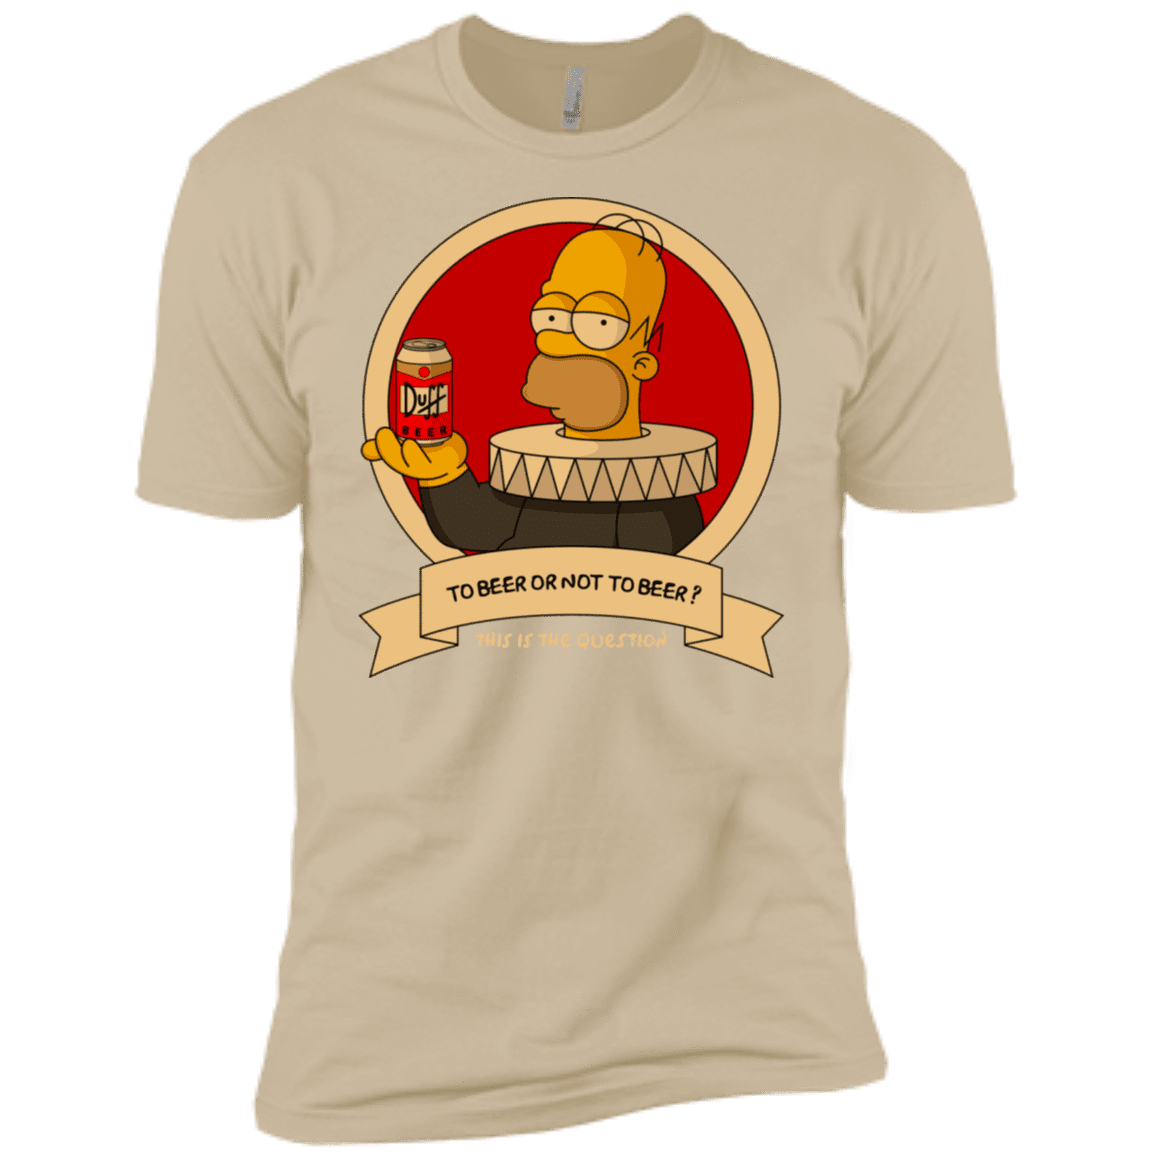 T-Shirts Sand / X-Small To Beer or not to Beer Men's Premium T-Shirt